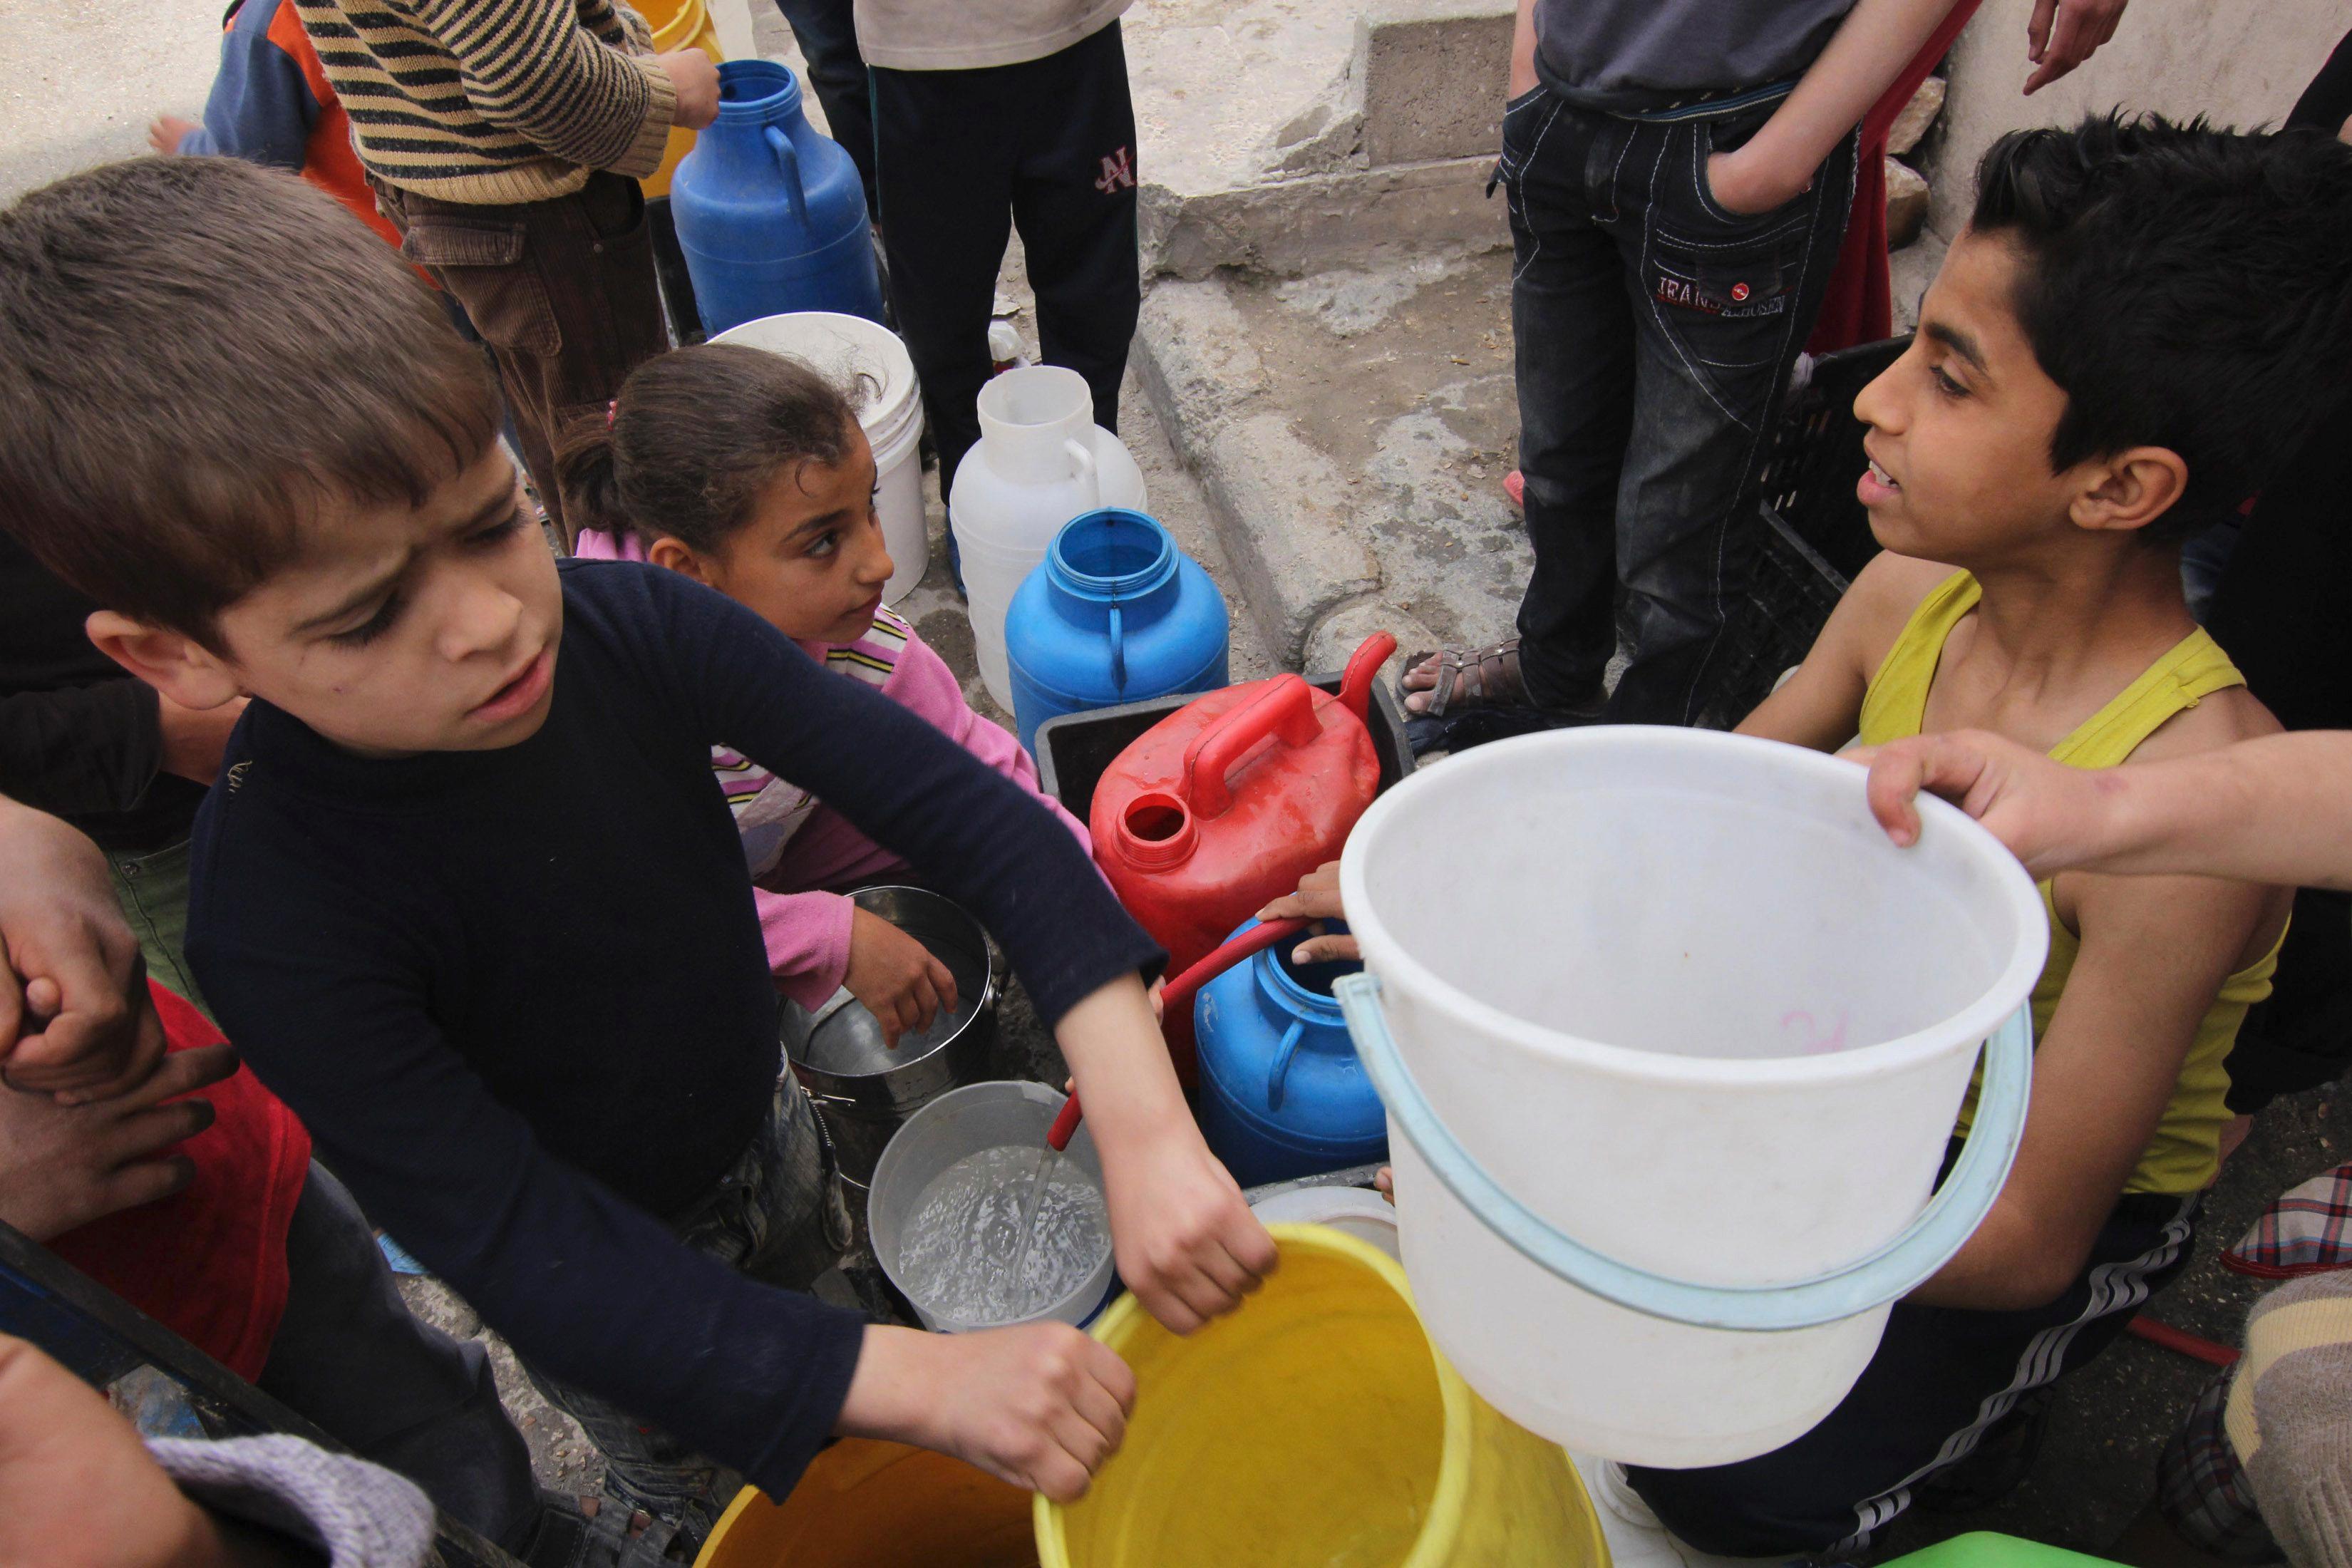 Children wait to collect water in Aleppo April 2, 2013. Around Syria, water shortages are worsening and supplies are sometimes contaminated, putting children at increased risk of diseases. REUTERS/Giath Taha 